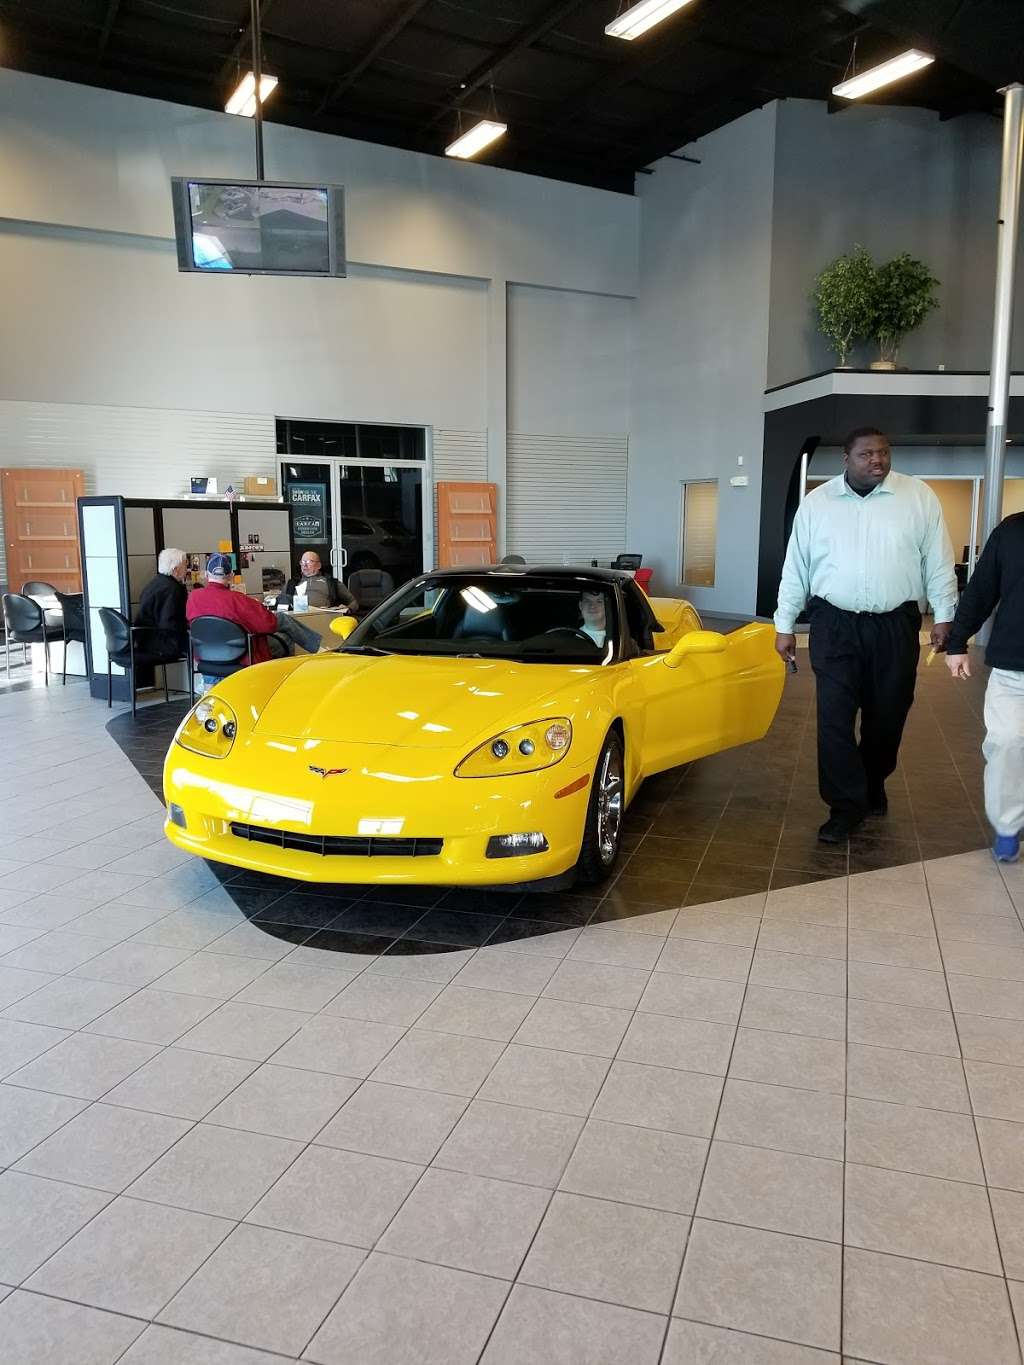 Mike Raisor Pre-Owned Center | 3960 State Road 38 East, Lafayette, IN 47905, USA | Phone: (765) 448-7064